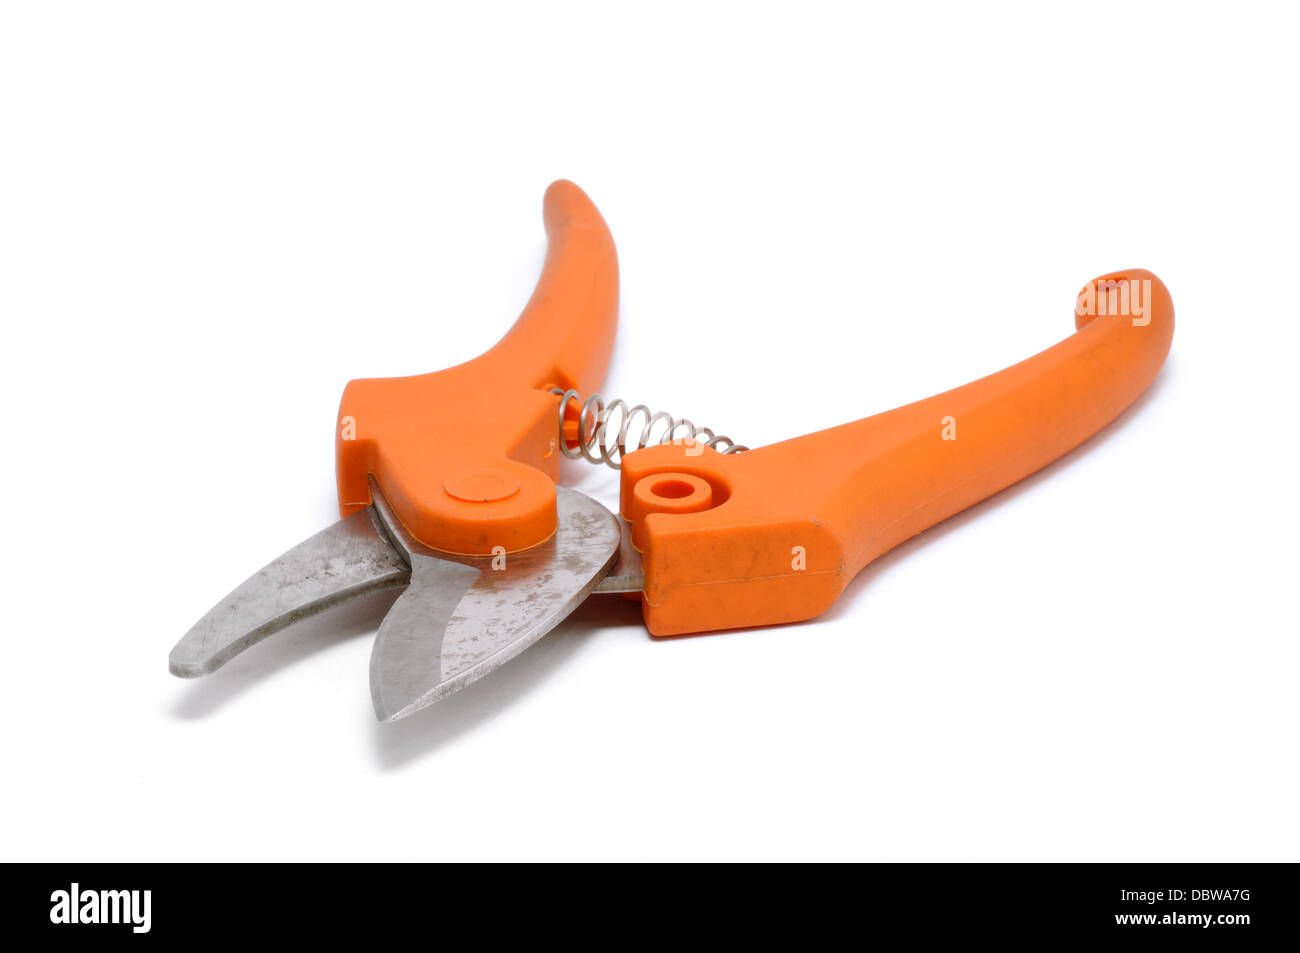 Pruning Shears / Secateurs - isolated on white background Stock Photo